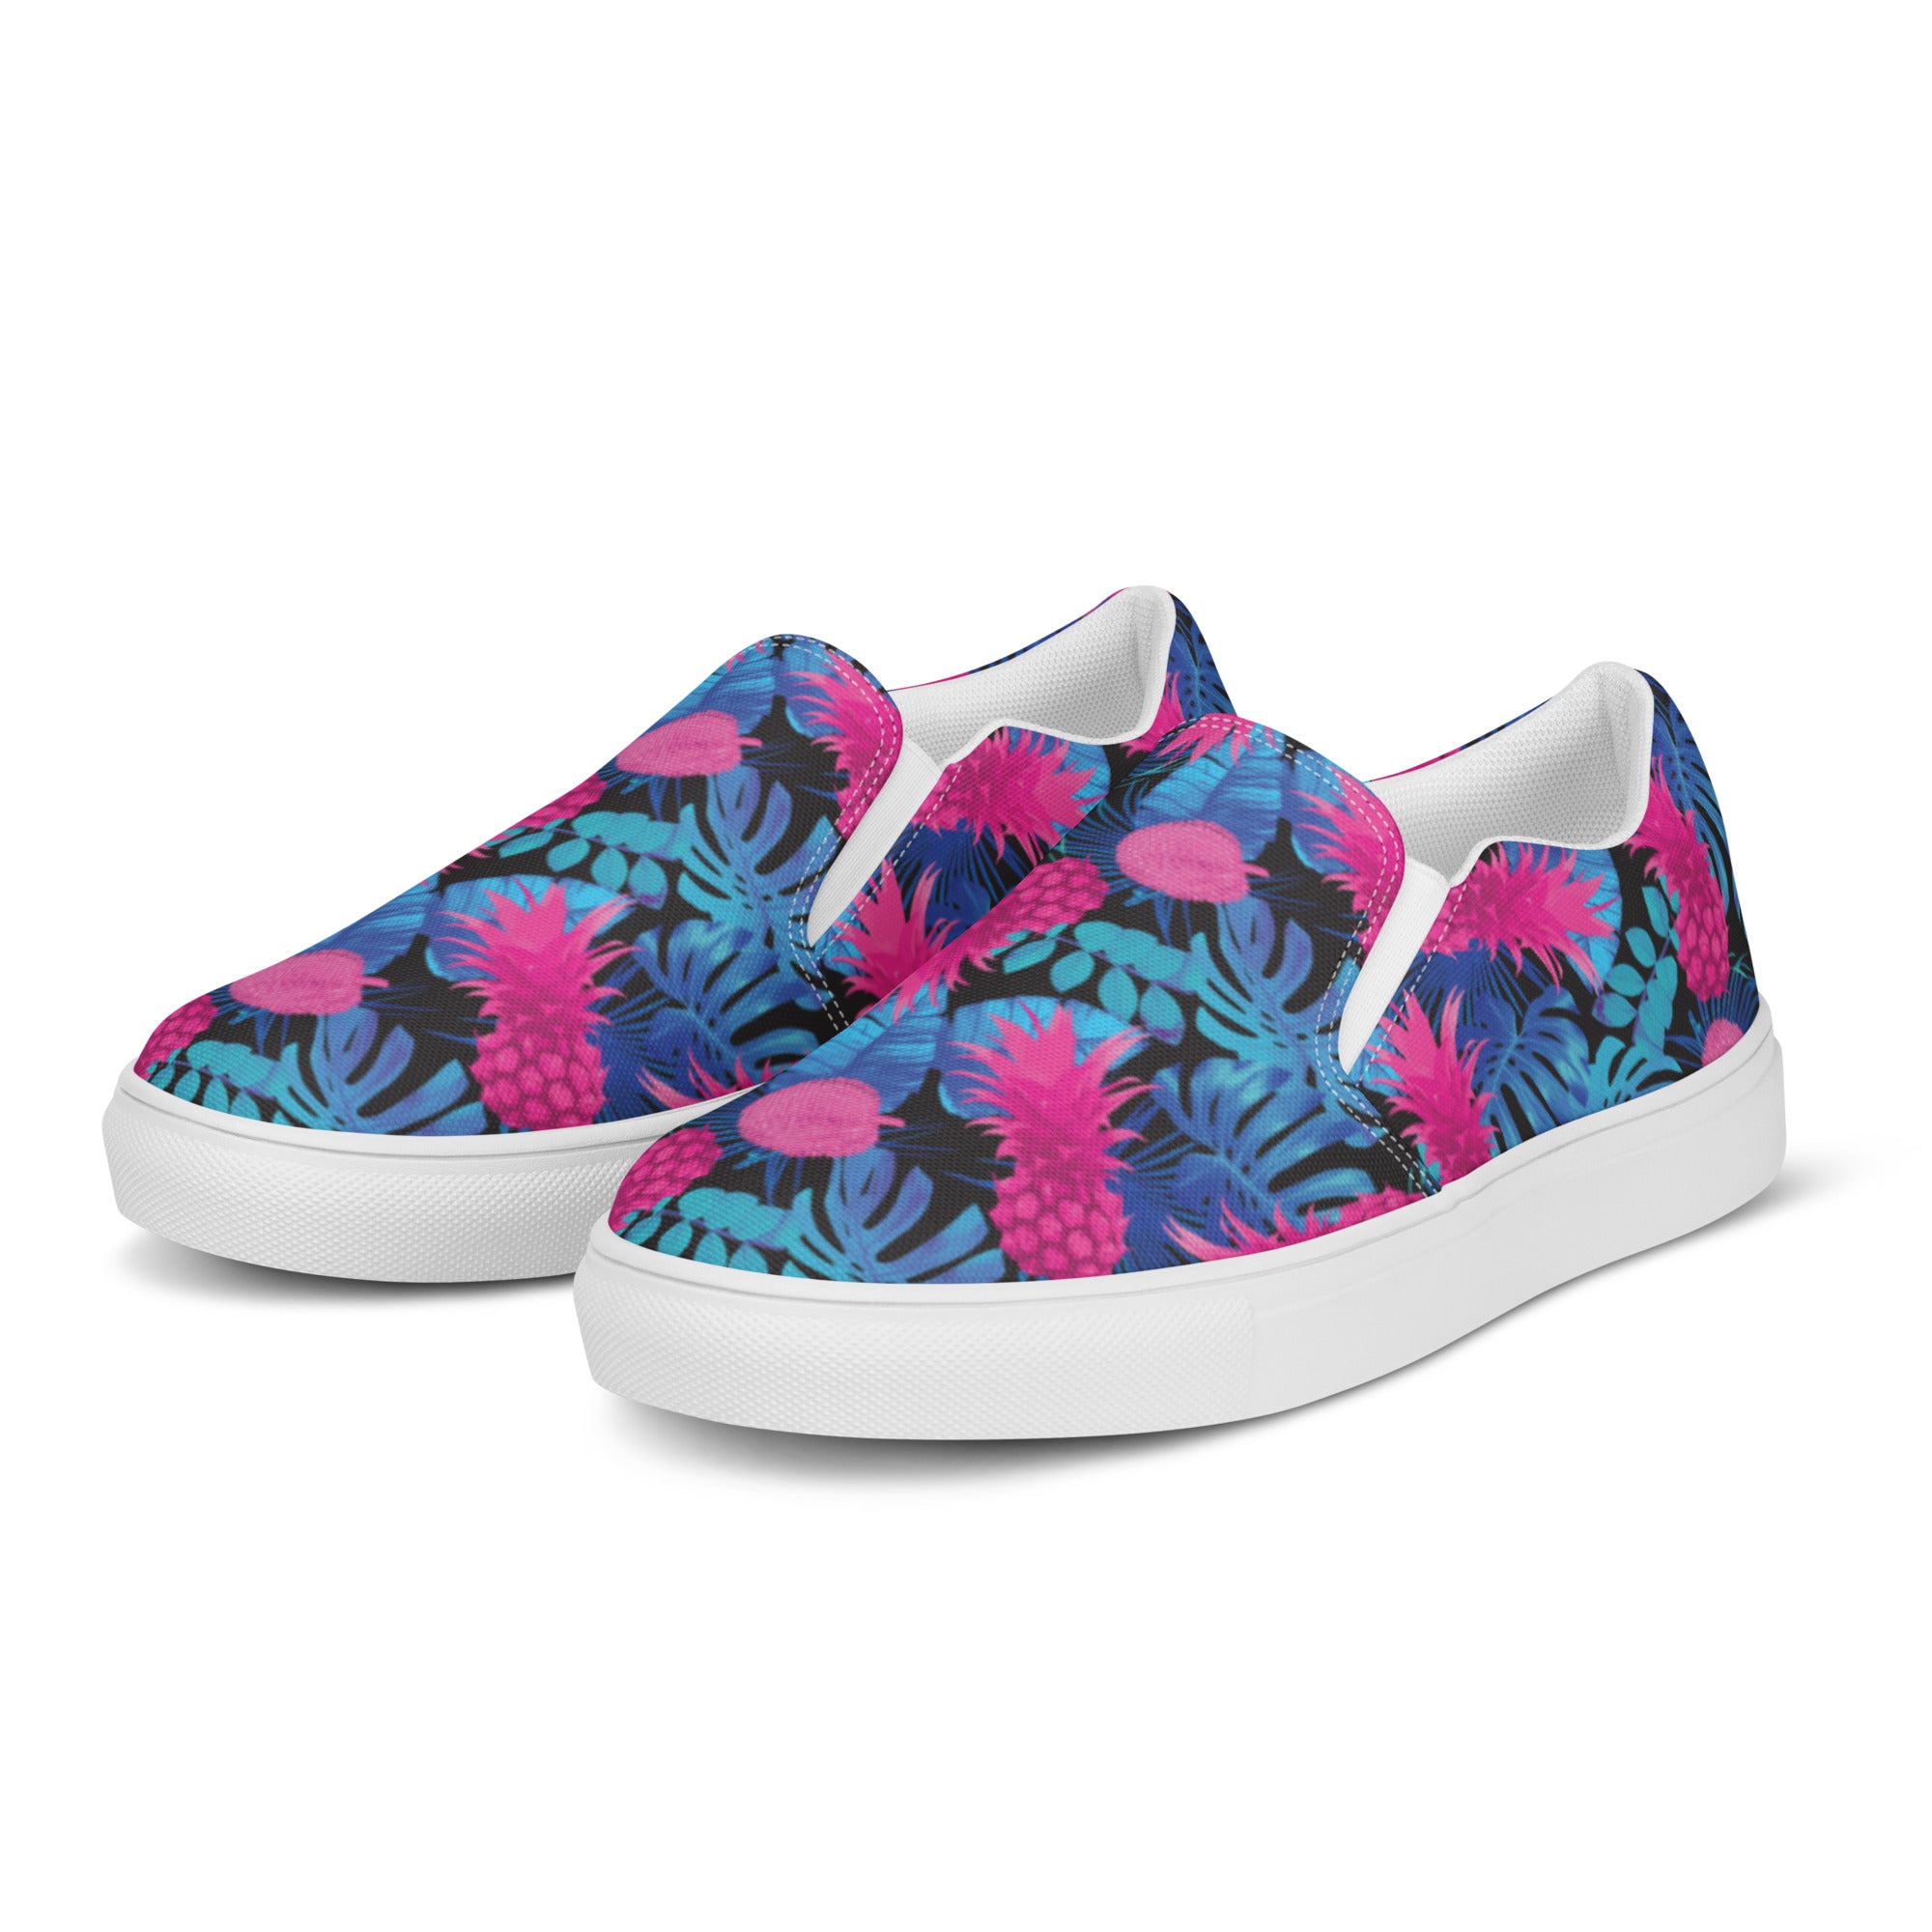 Rad Palm Pineapple Express Men’s Slip On Canvas Shoes